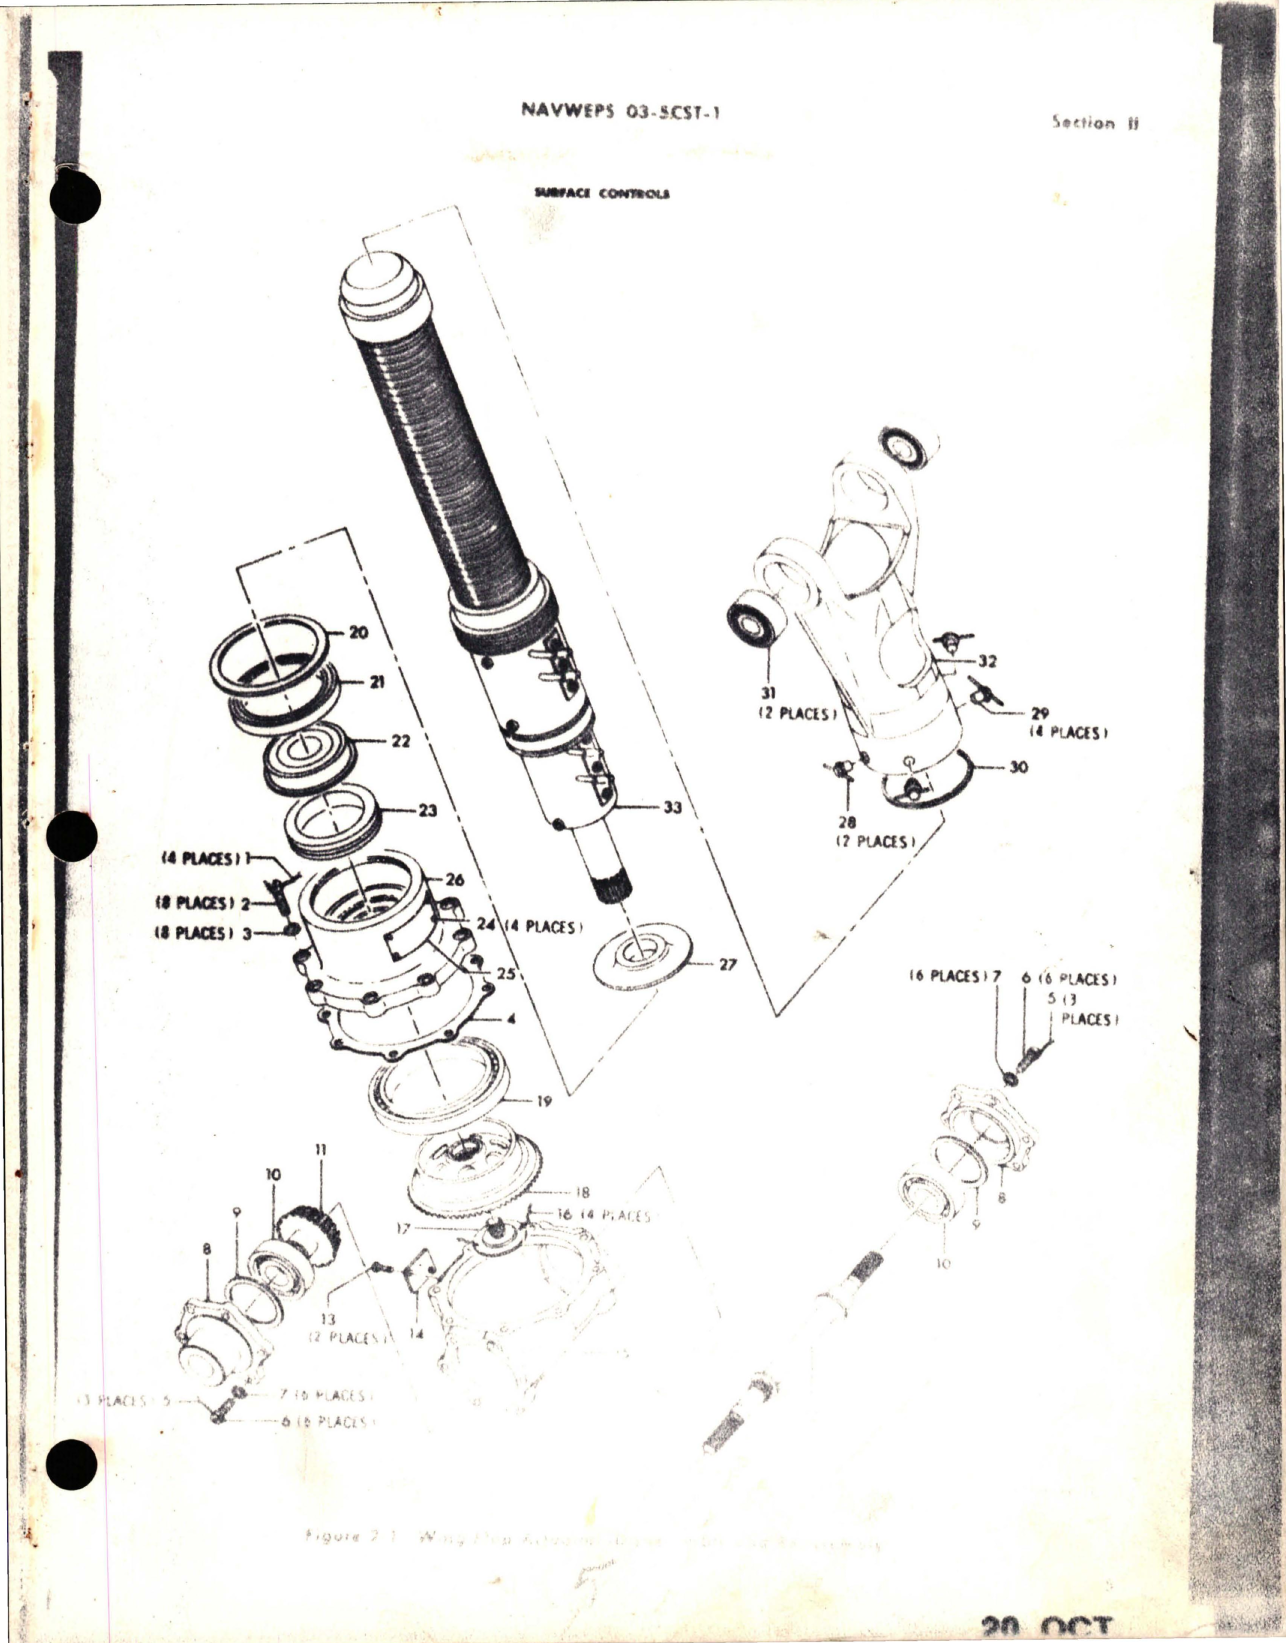 Sample page 7 from AirCorps Library document: Maintenance Instructions for Wing Flap Actuator - Parts SPL5588-1 and SPL5568-3 